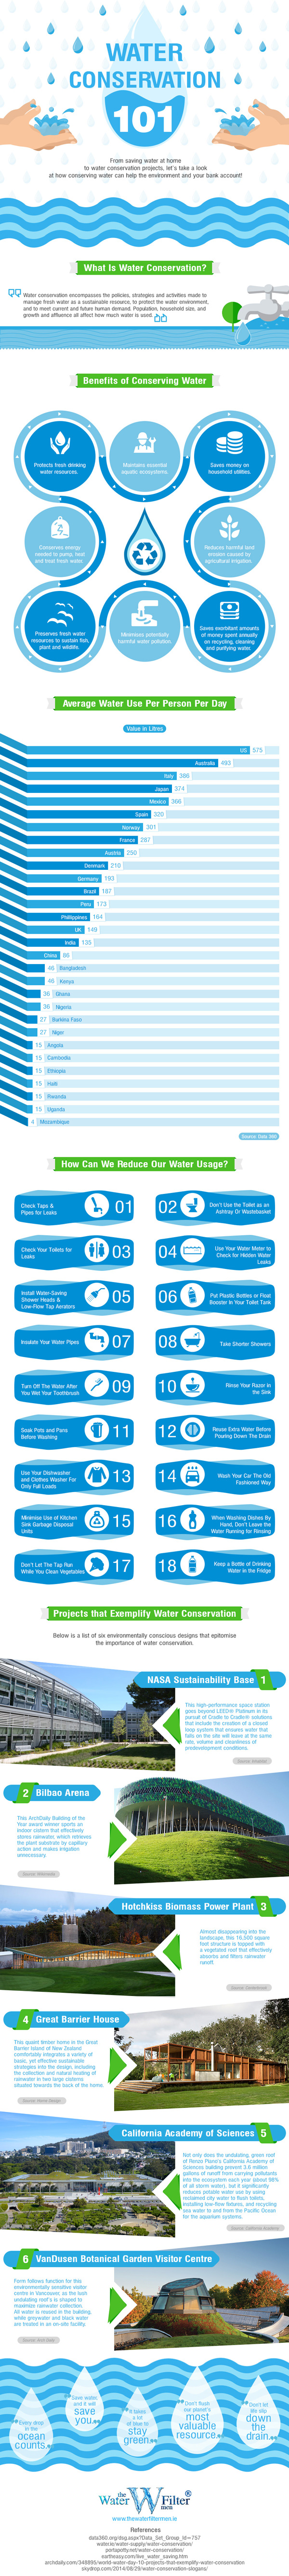  Infographic courtesy of The Water Filter Men, Ireland